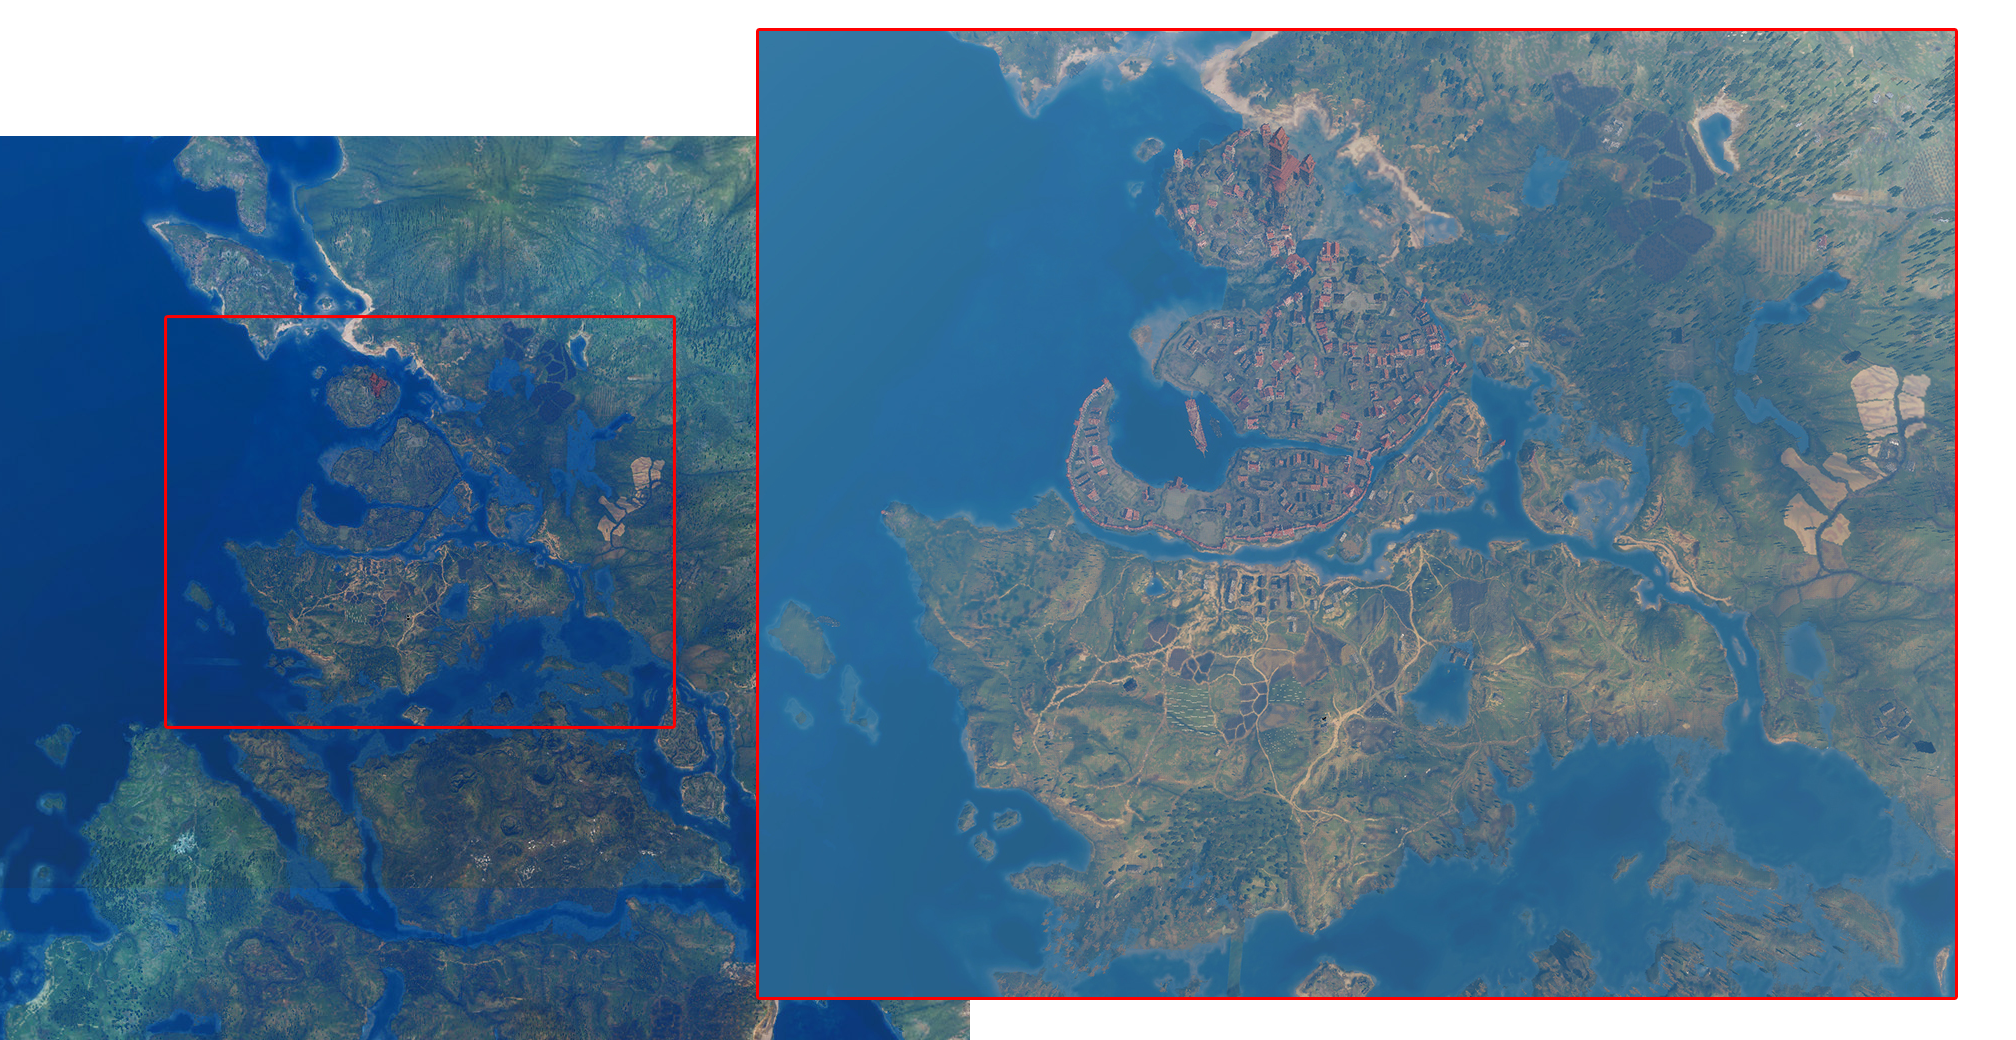 The Witcher 3 topography